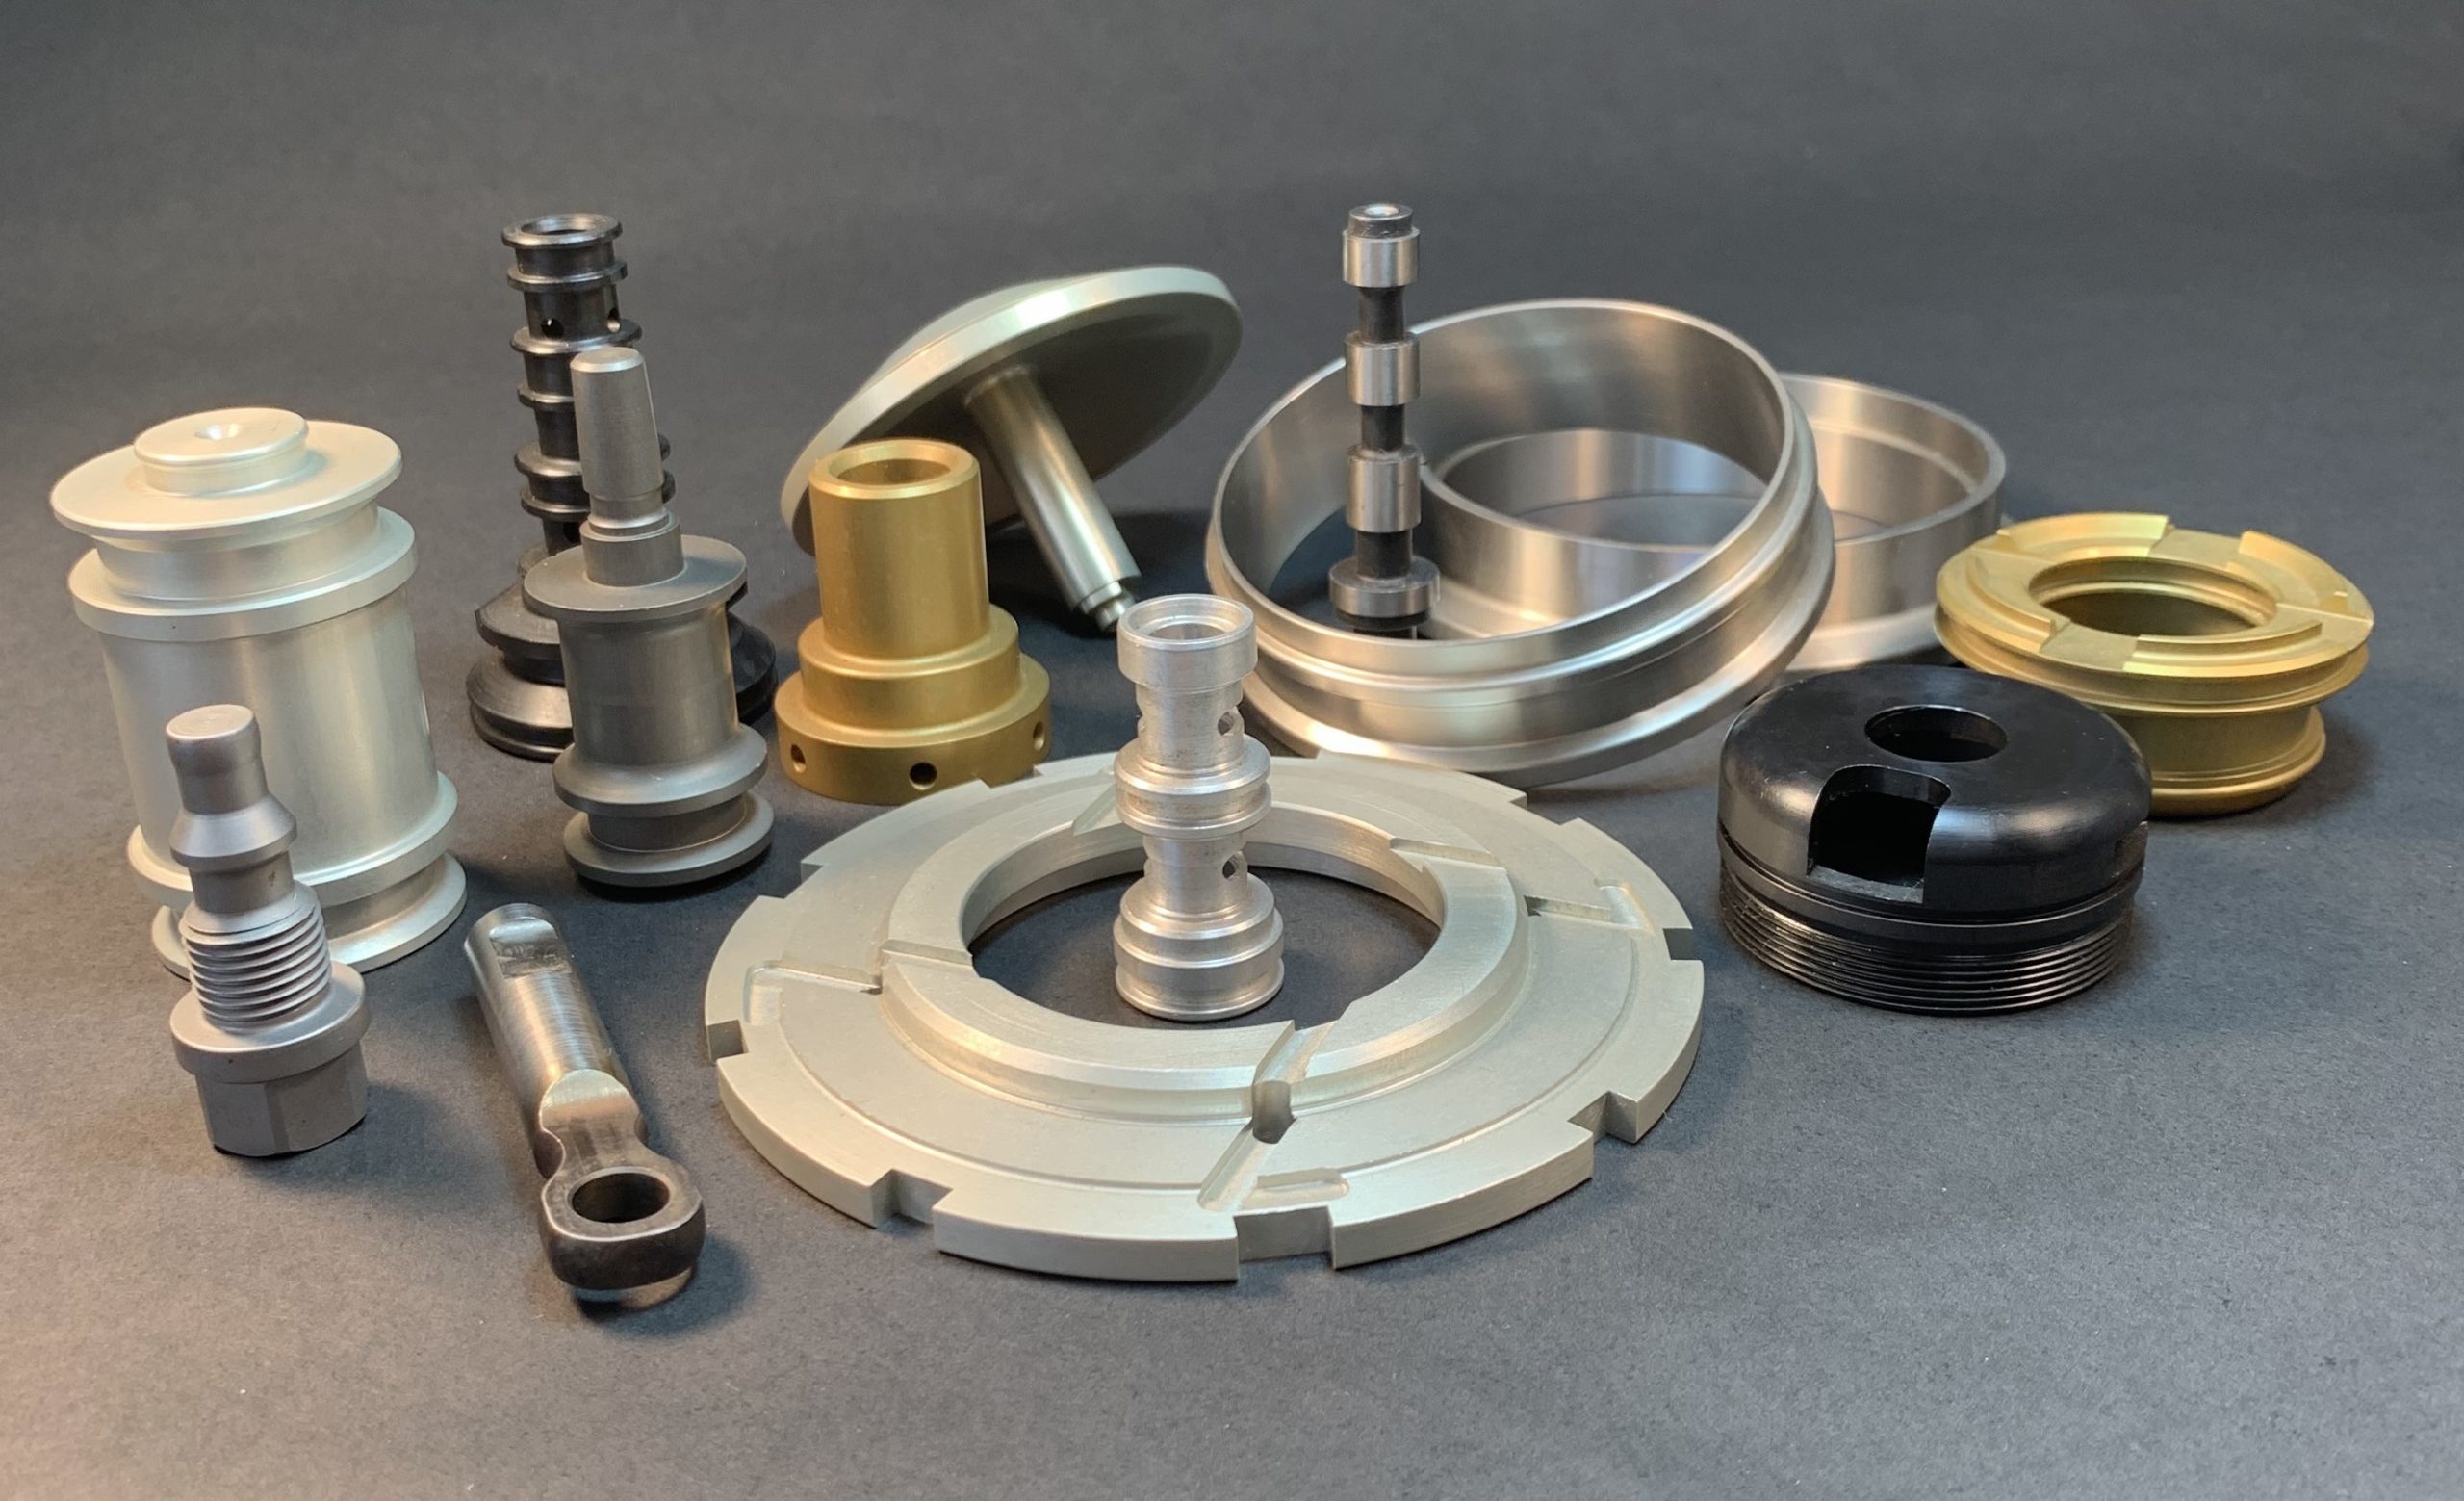 Automotive Parts. Steel (4140, 8620, 521000), aluminum (6061, 7075) and stainless steel 304.